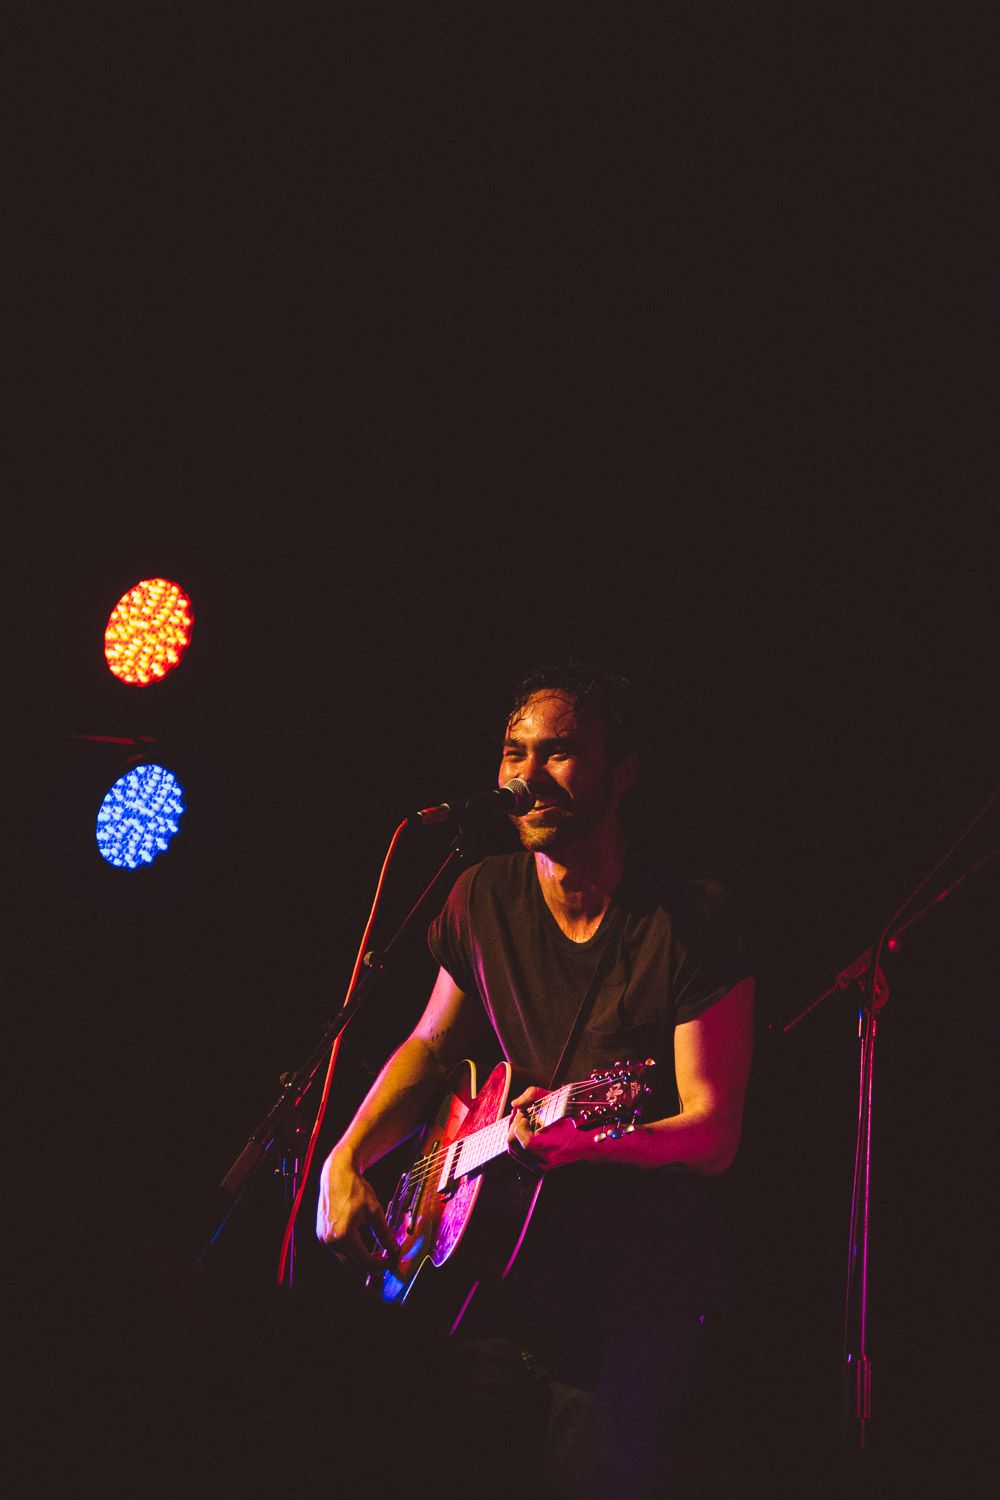 Shakey Graves Wallpapers